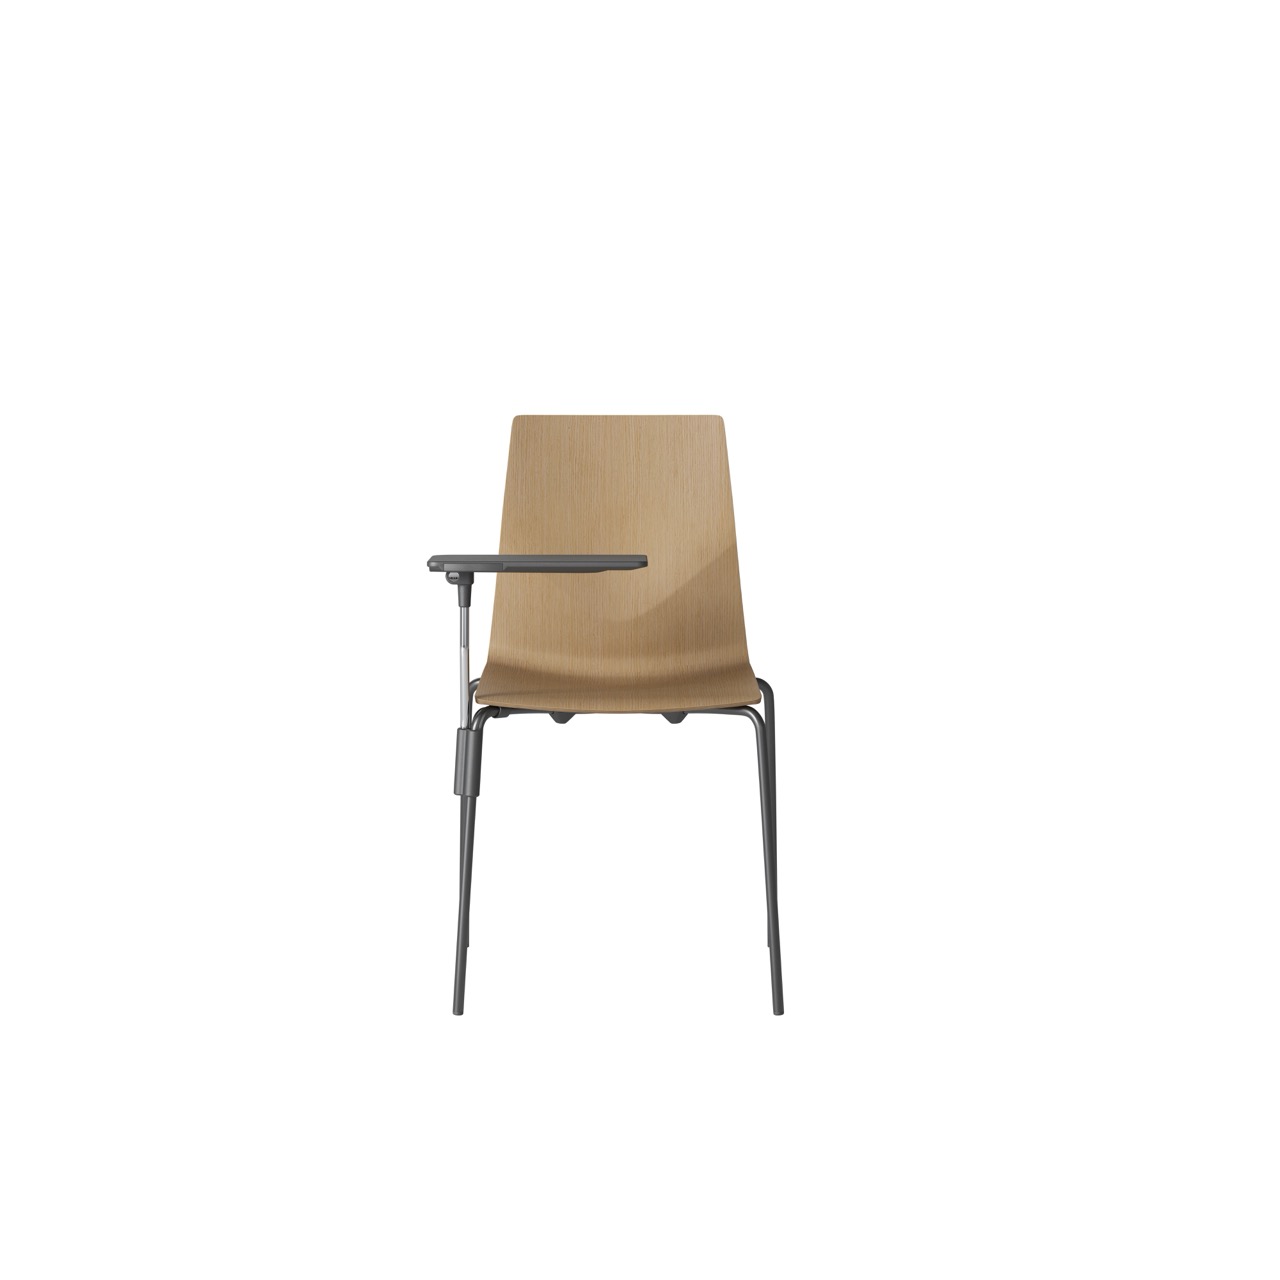 OCEE&FOUR – Chairs – FourCast 2 Four – Veneer shell - Inno Note - Packshot Image 3 Large